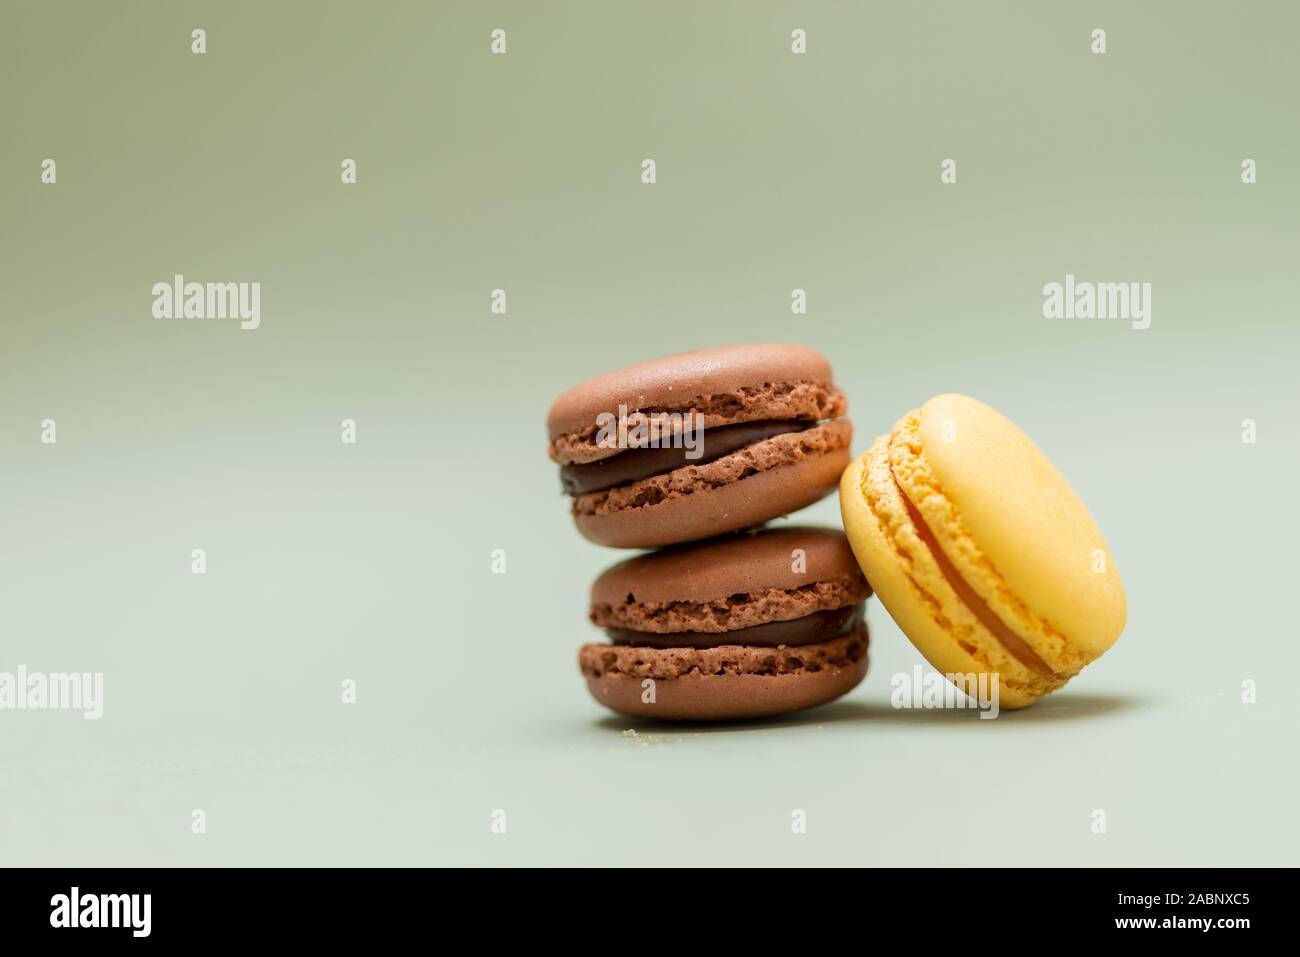 Colored tasty  macaroons over a green background. Stock Photo